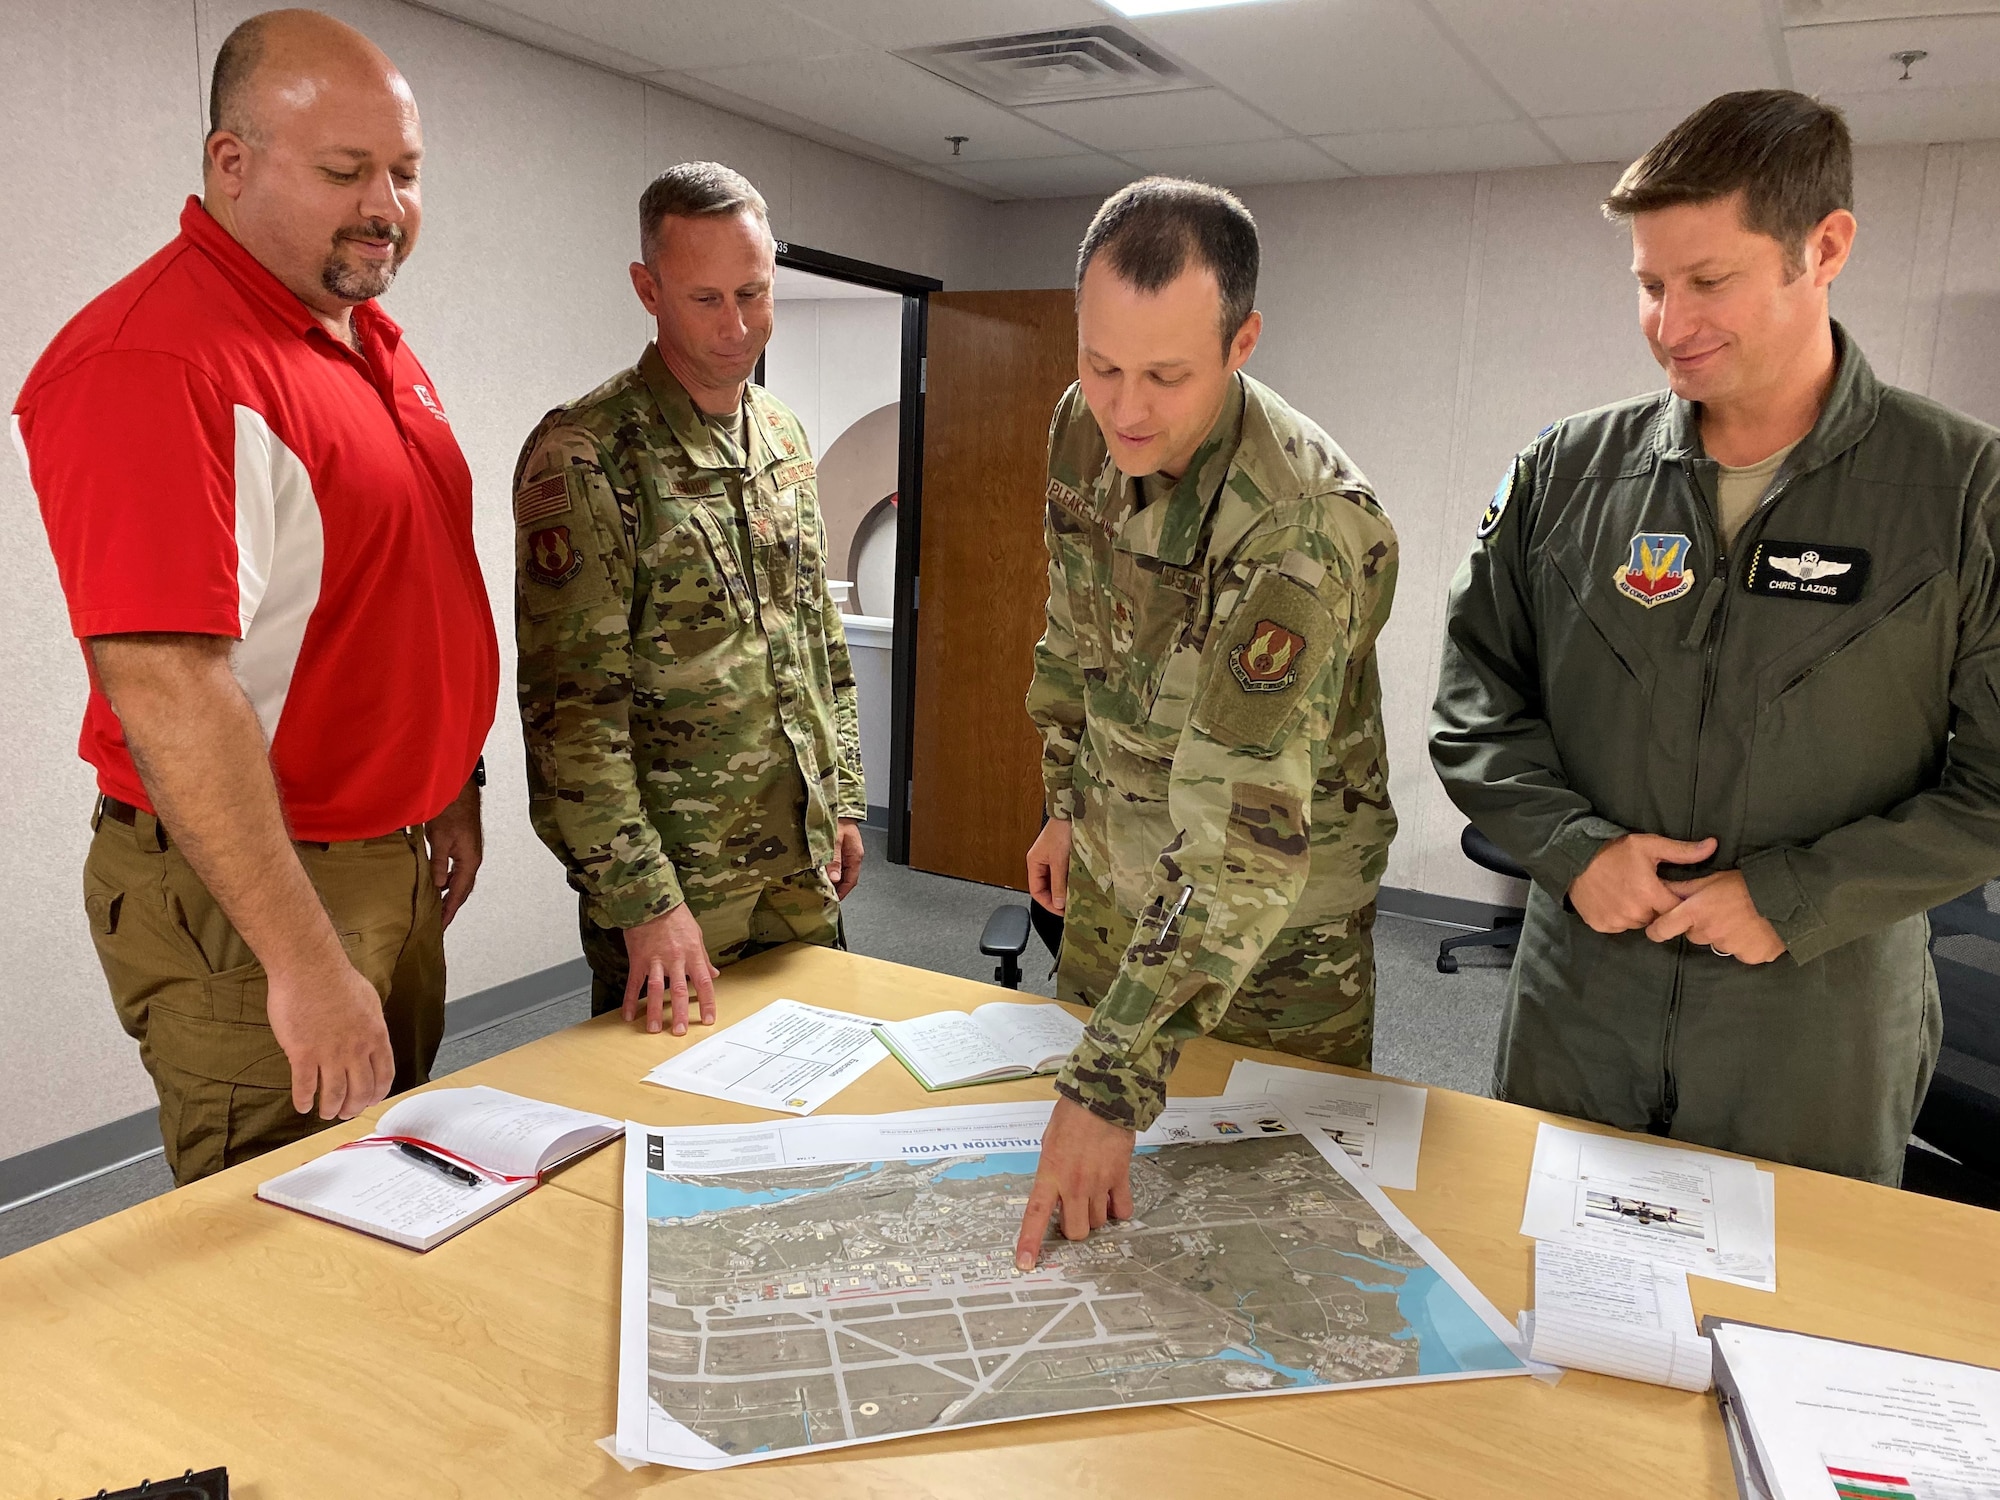 The Tyndall Project Management Office is rebuilding the base and the U.S. Army Corps of Engineers became an important ally as the rebuild moved forward.